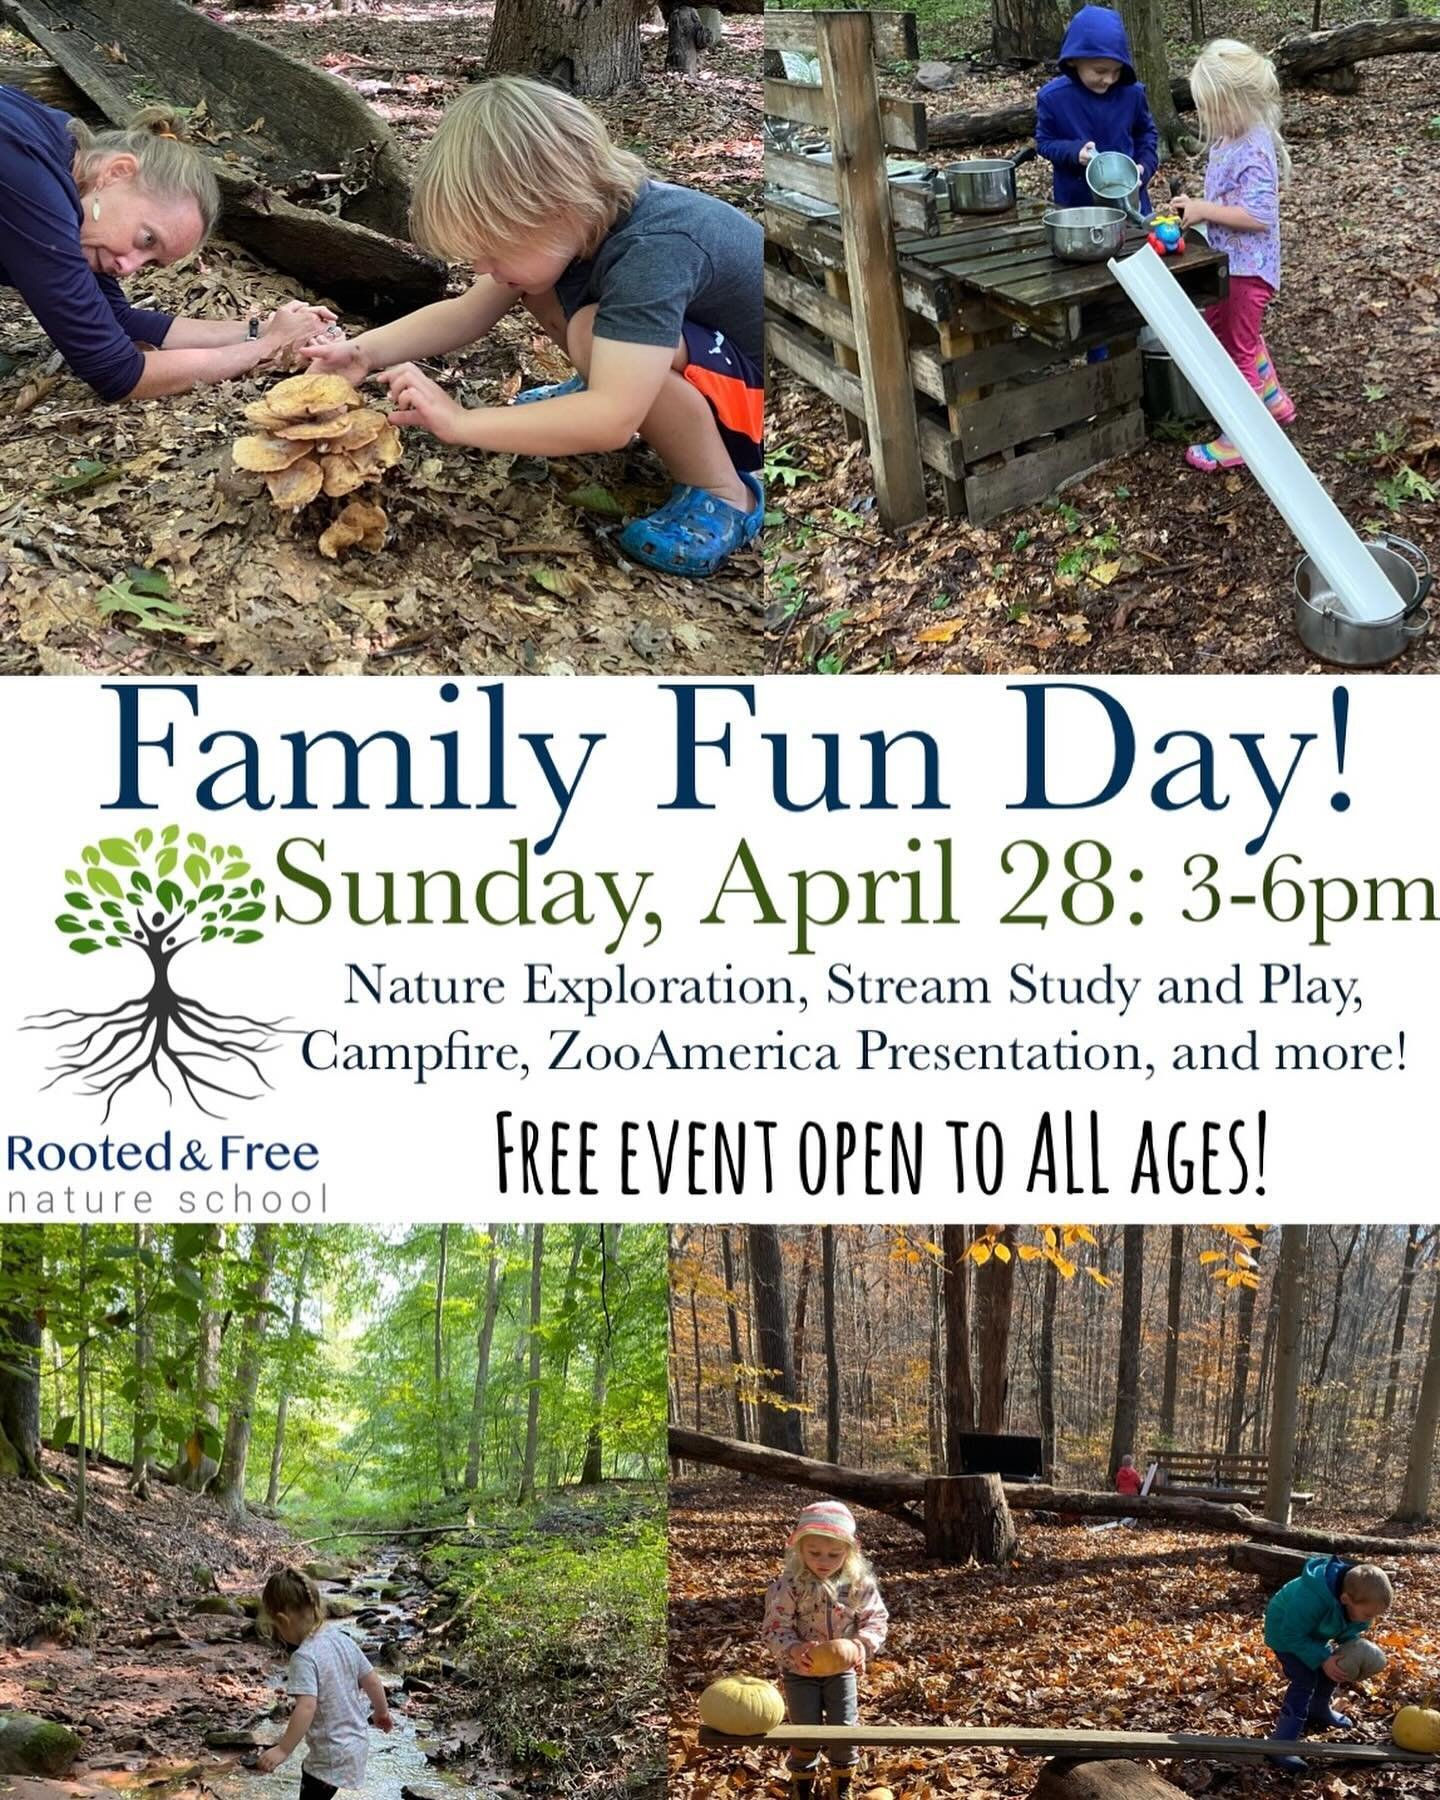 Our 3rd annual Family Fun Day is TOMORROW- Sunday, April 28 from 3-6pm. Come learn about animals at ZooAmerica&rsquo;s 3:30 or 5:00 presentation. Join A Space to Make in a collaborative art project, relax while doing yoga anytime between 4-5, and roa